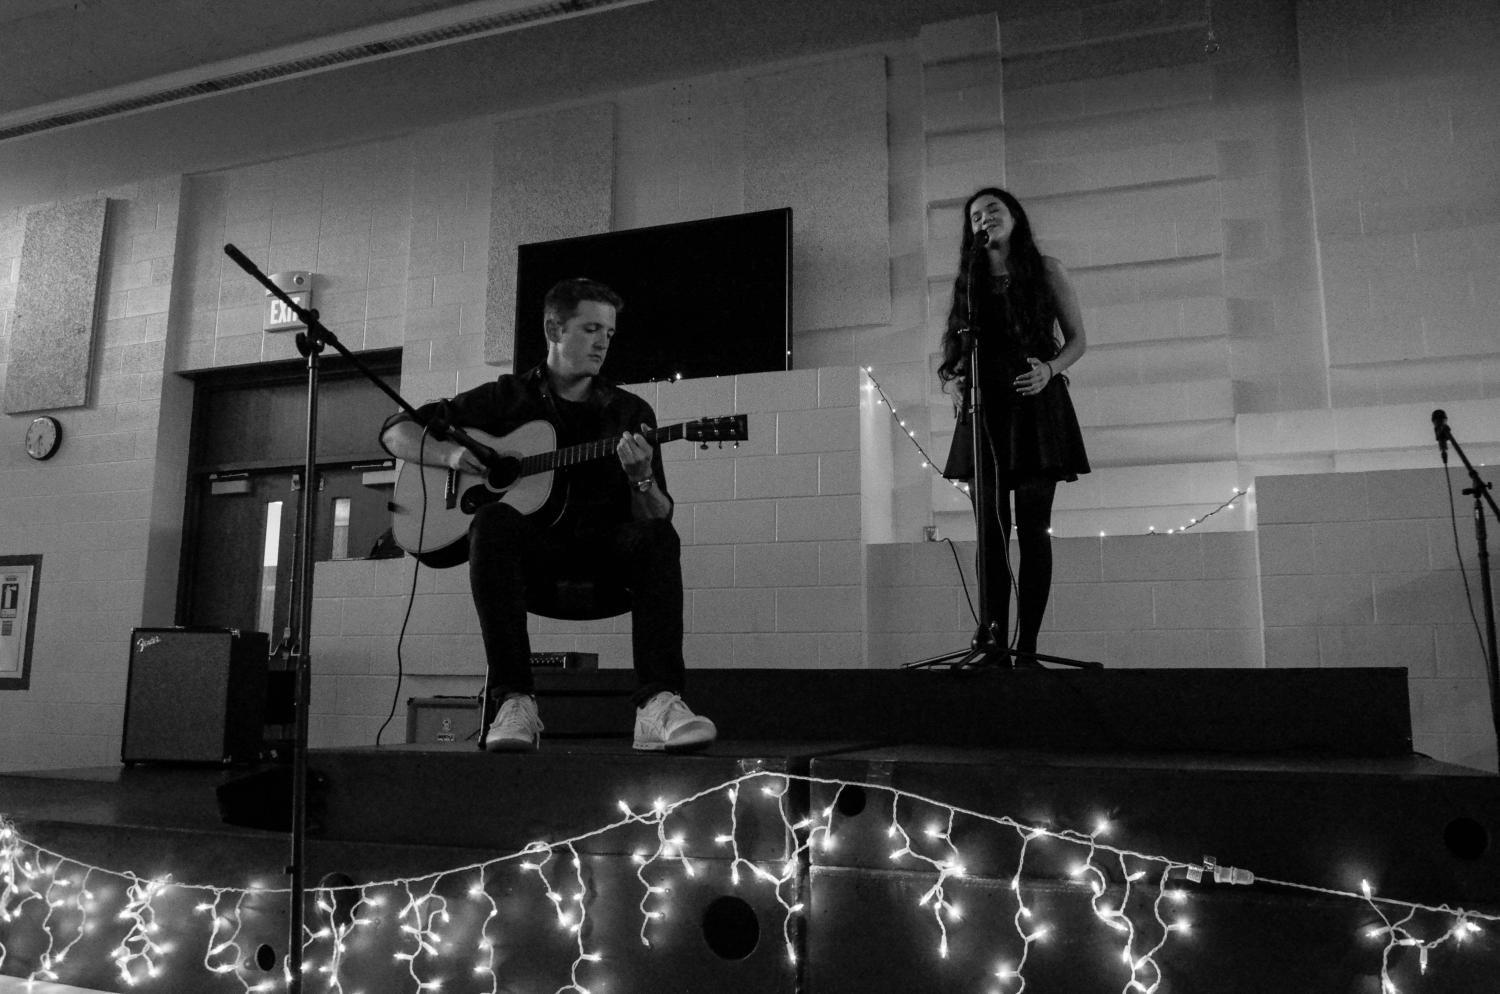 Social studies teacher Dominic Iannone performs Like a Star by Corinne Bailey Rae with Olivia Manaligod 18 for the fundraising Music Playathon held on May 20 in the West High Cafeteria.  